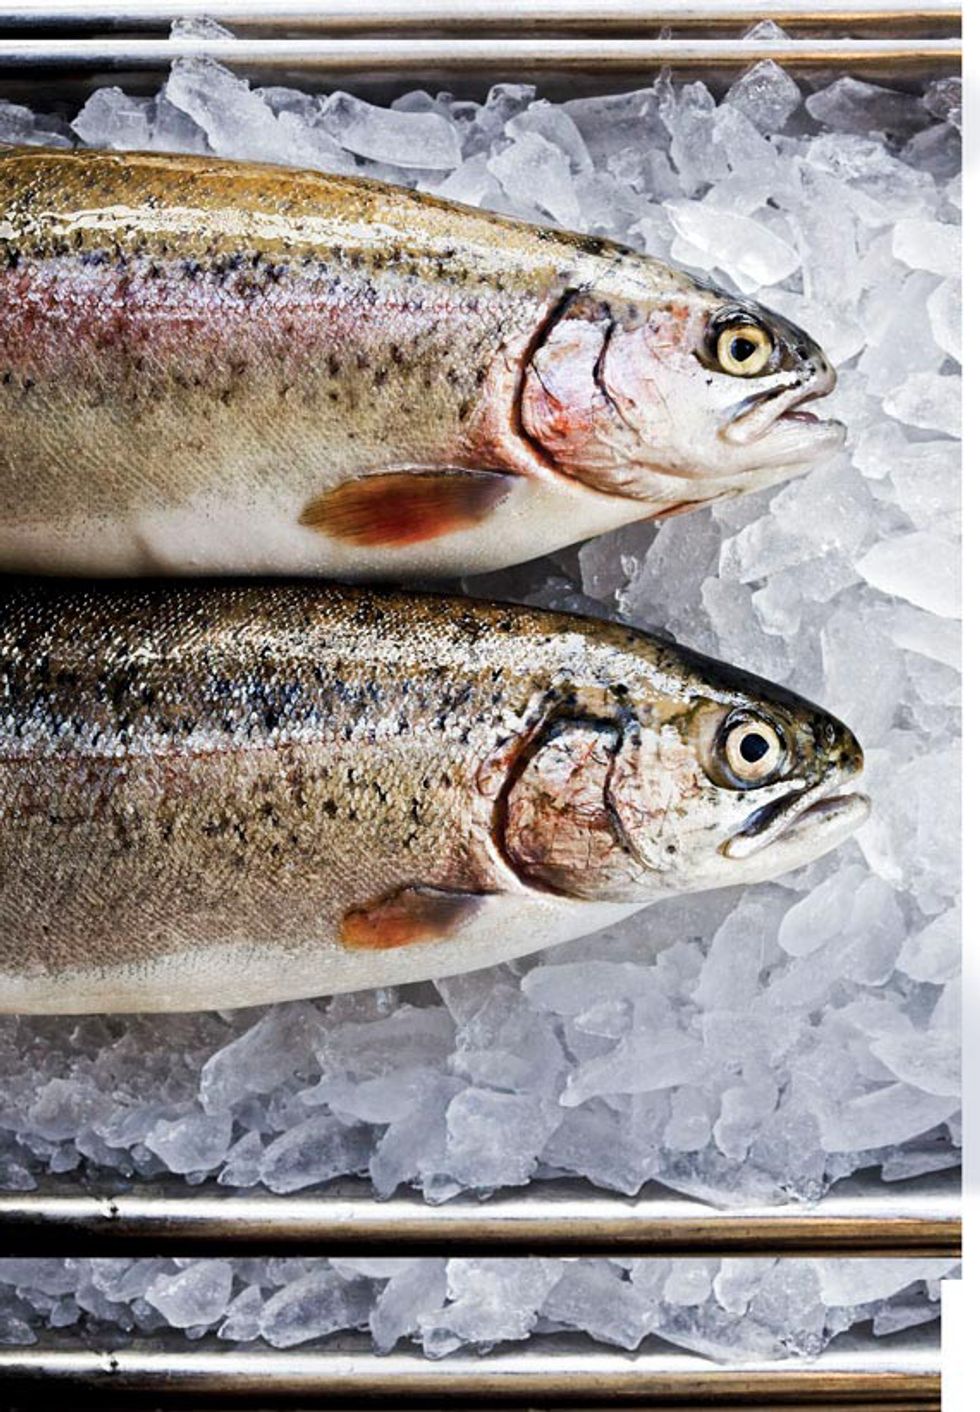 With California King Salmon Still in Peril, Trout is Worth Considering